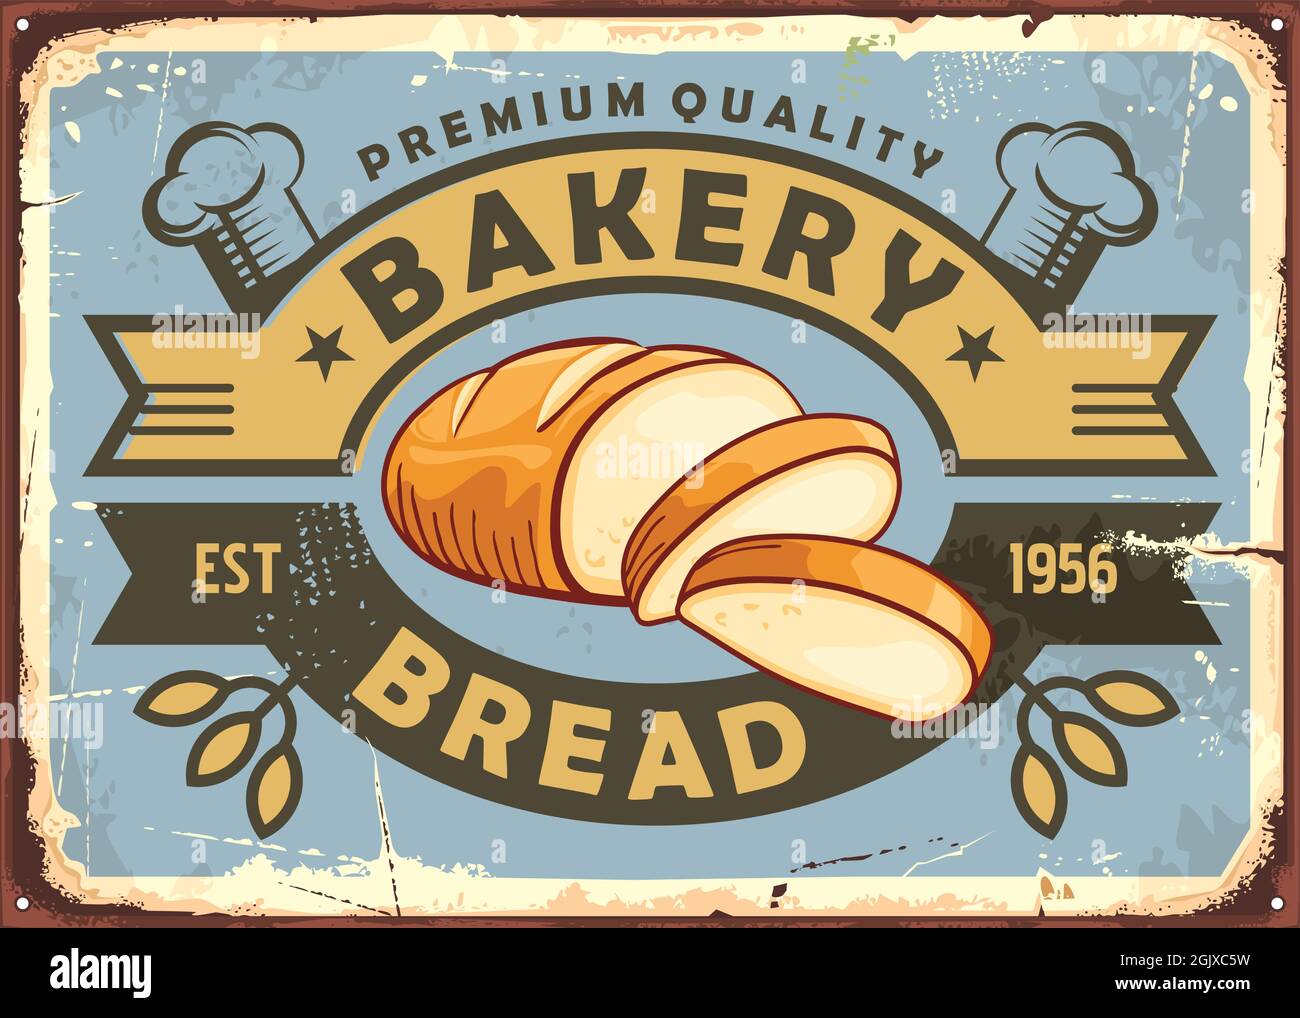 Old fashioned bakery sign with bread loaf and decorative ribbons. Vintage bakery sign. Retro poster design with baked goods and pastries. Stock Vector